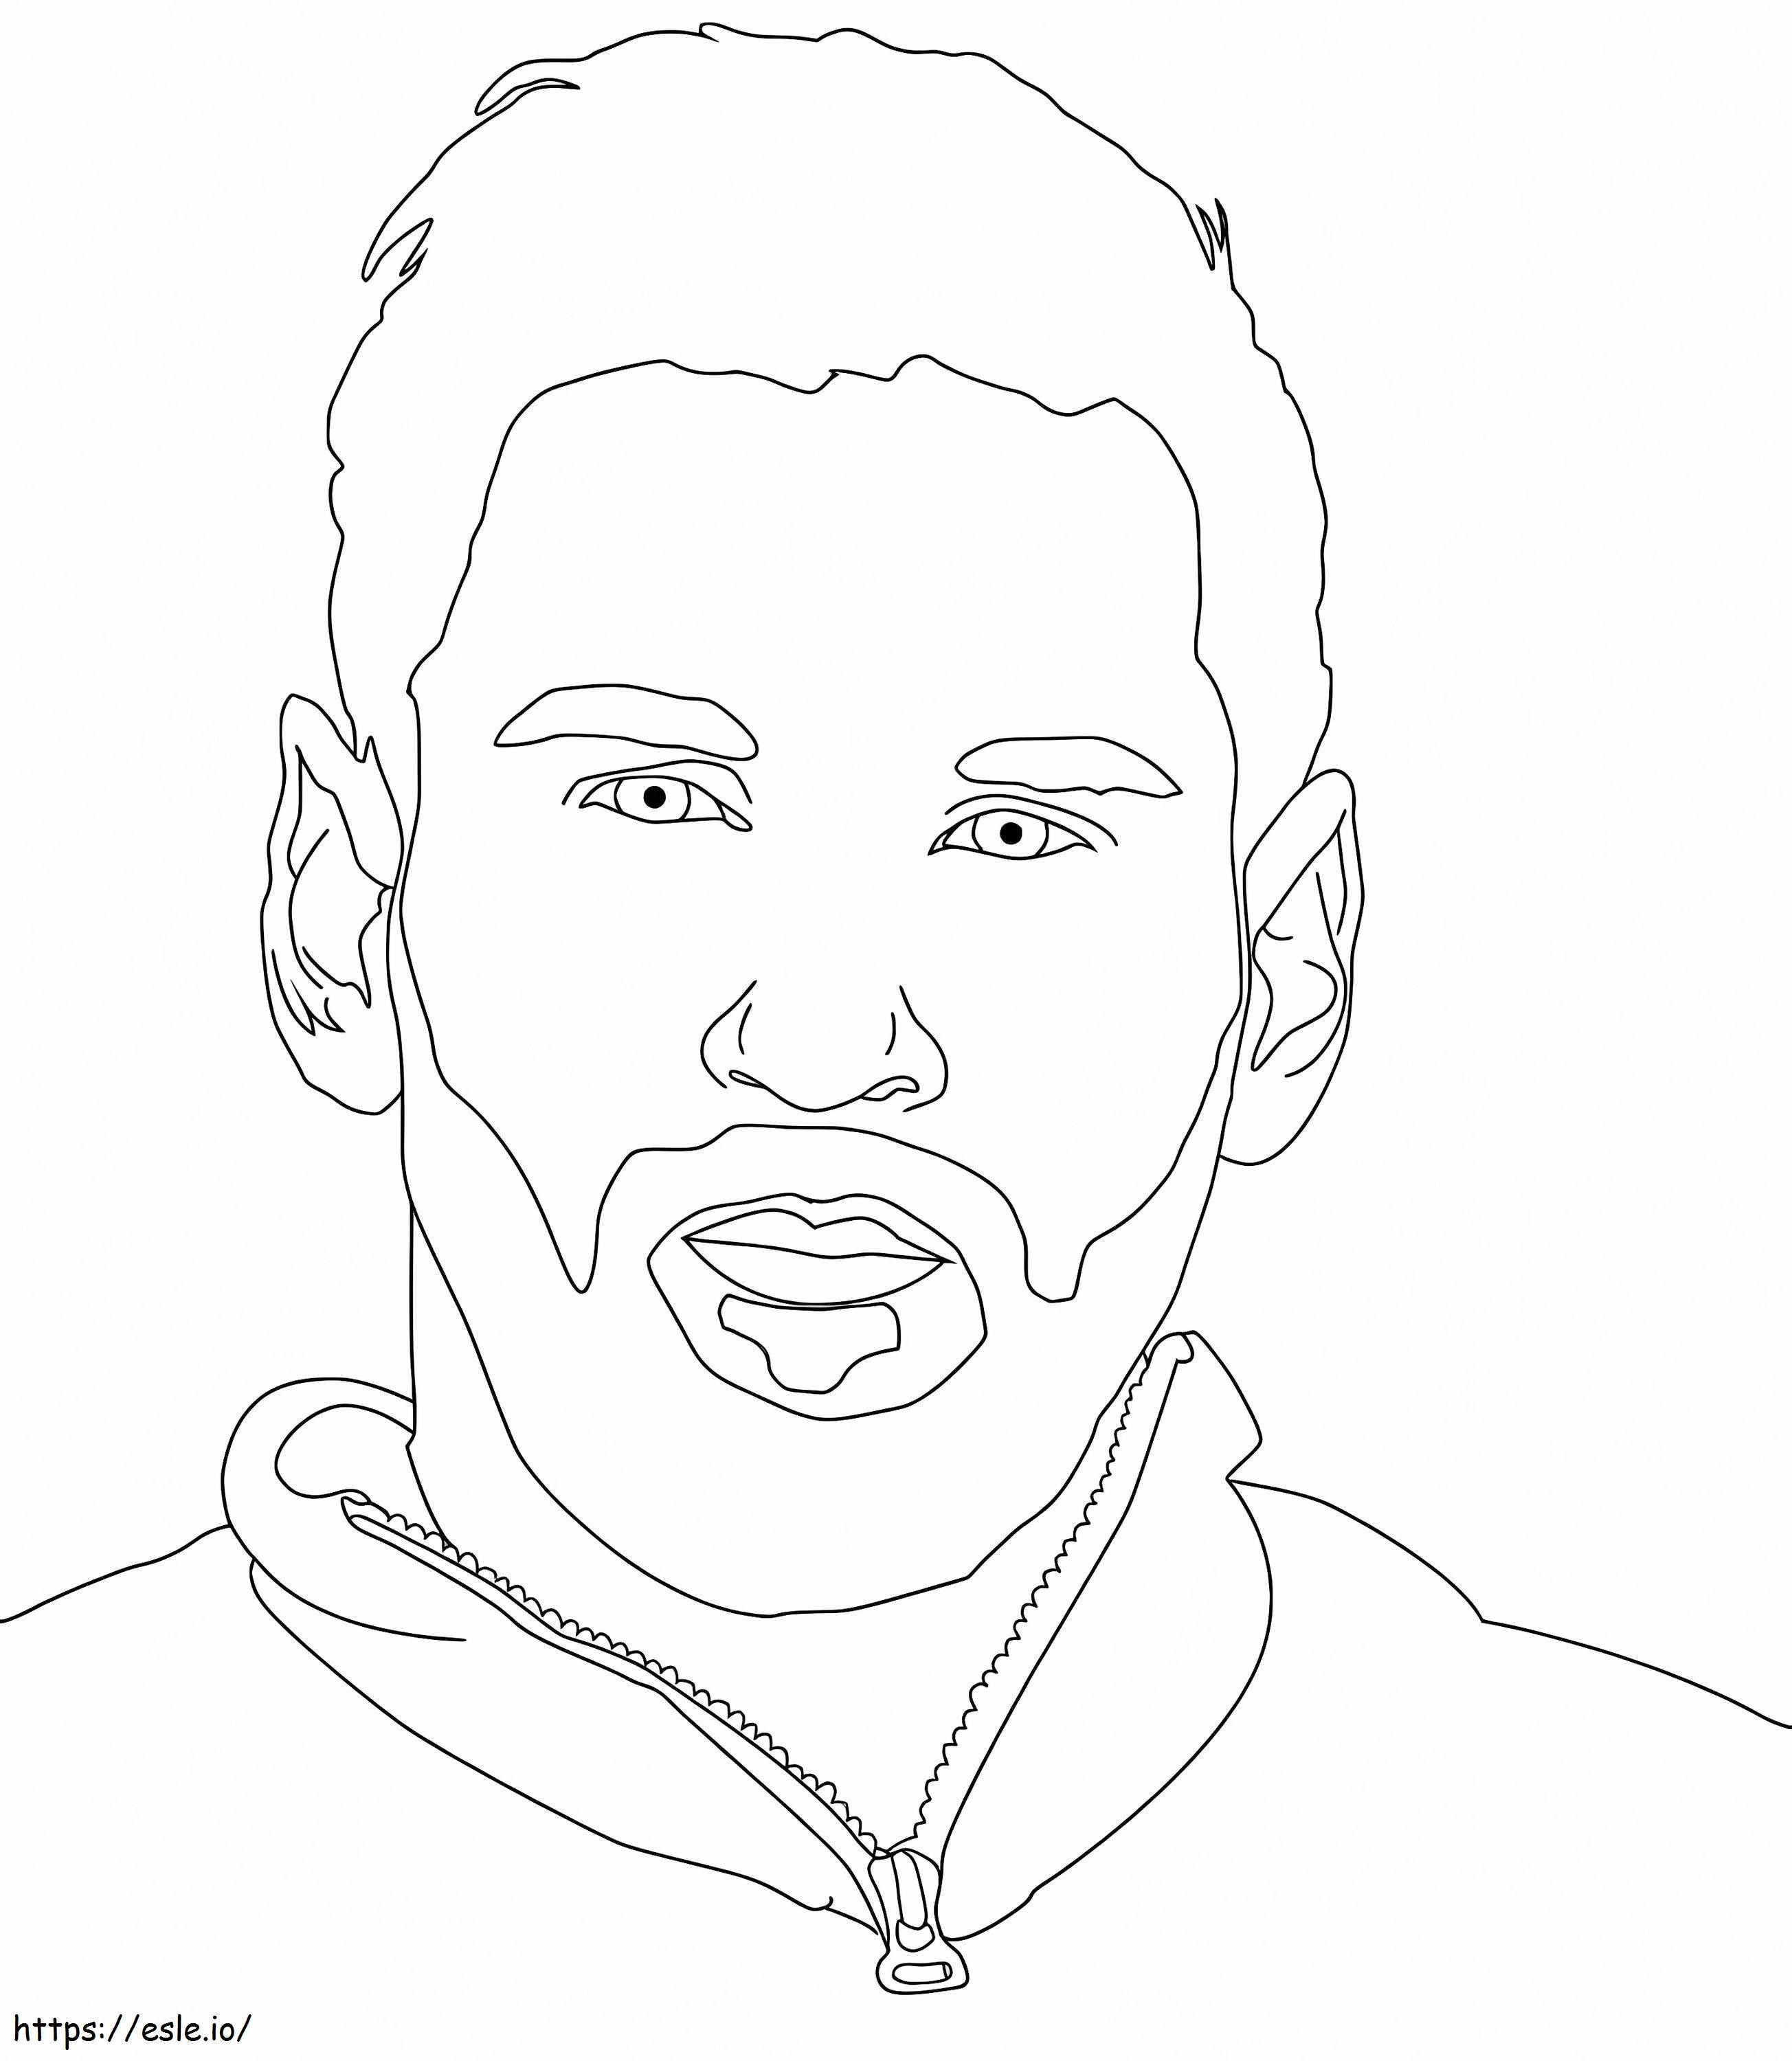 Lionel Messi 1 coloring page